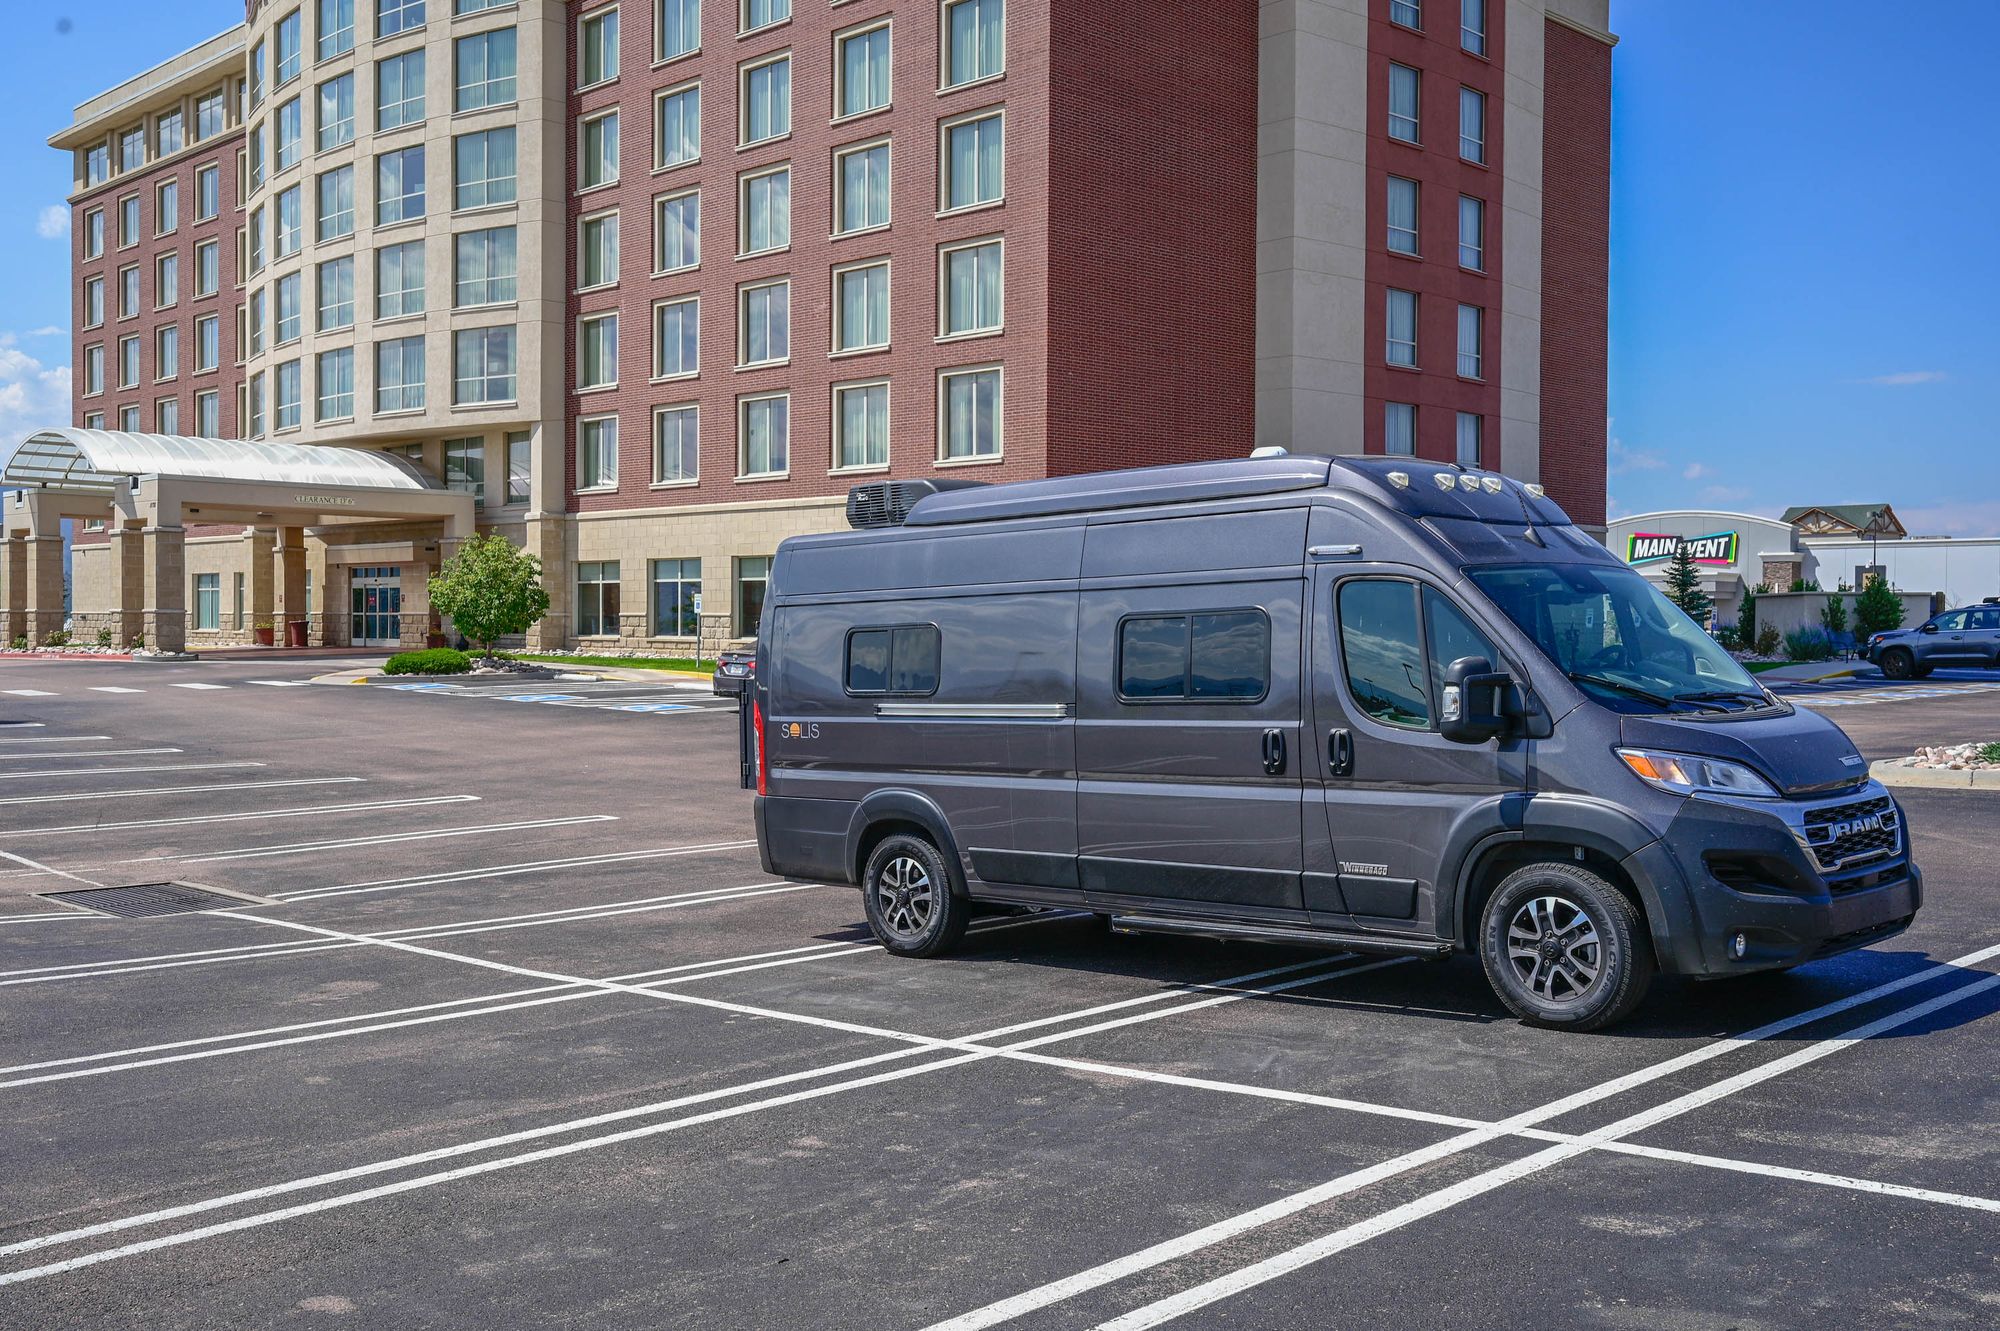 Hotels Versus RVs: Which is Cheaper? [7 Cost-Saving Examples]